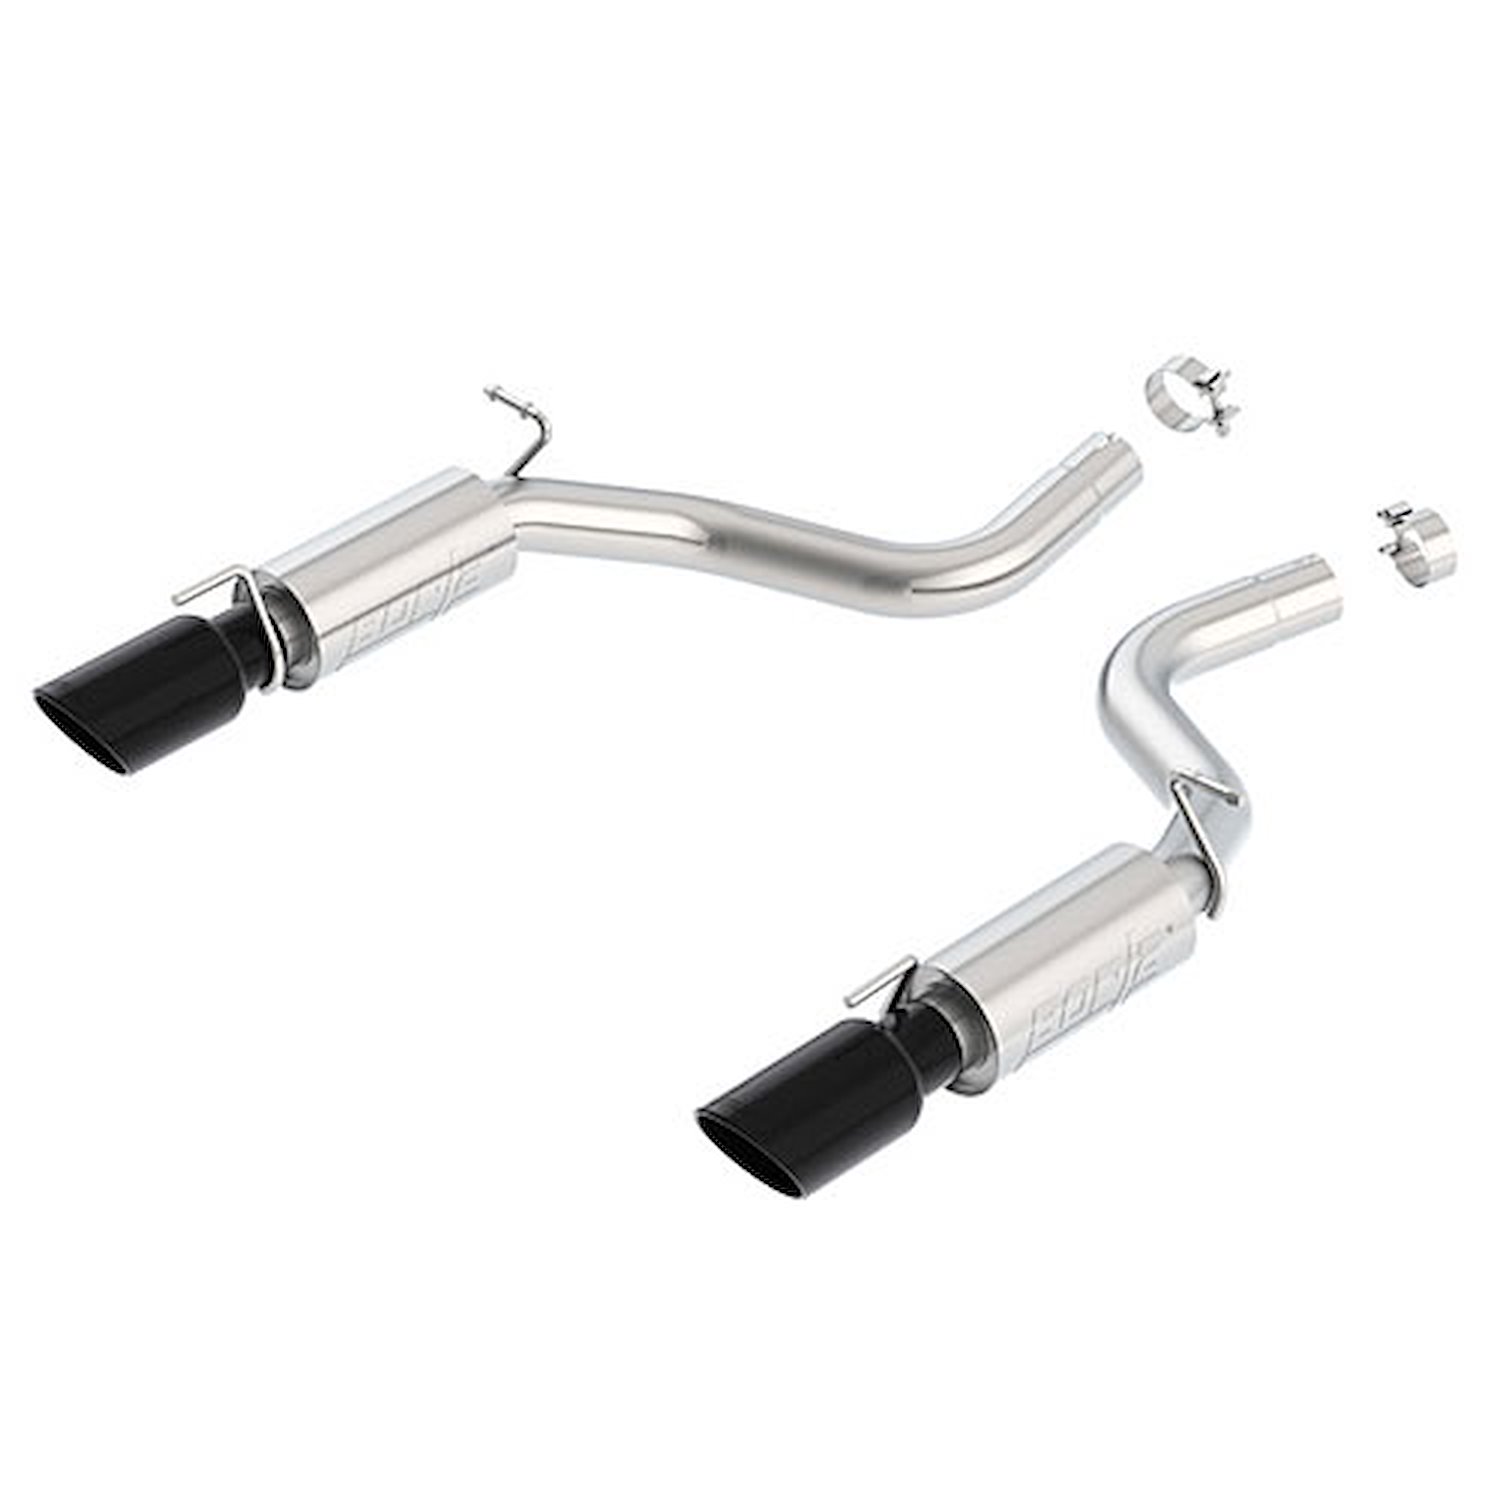 Axle-Back Exhaust System 2012-2014 Chrysler 300/Dodge Charger 6.4L Hemi